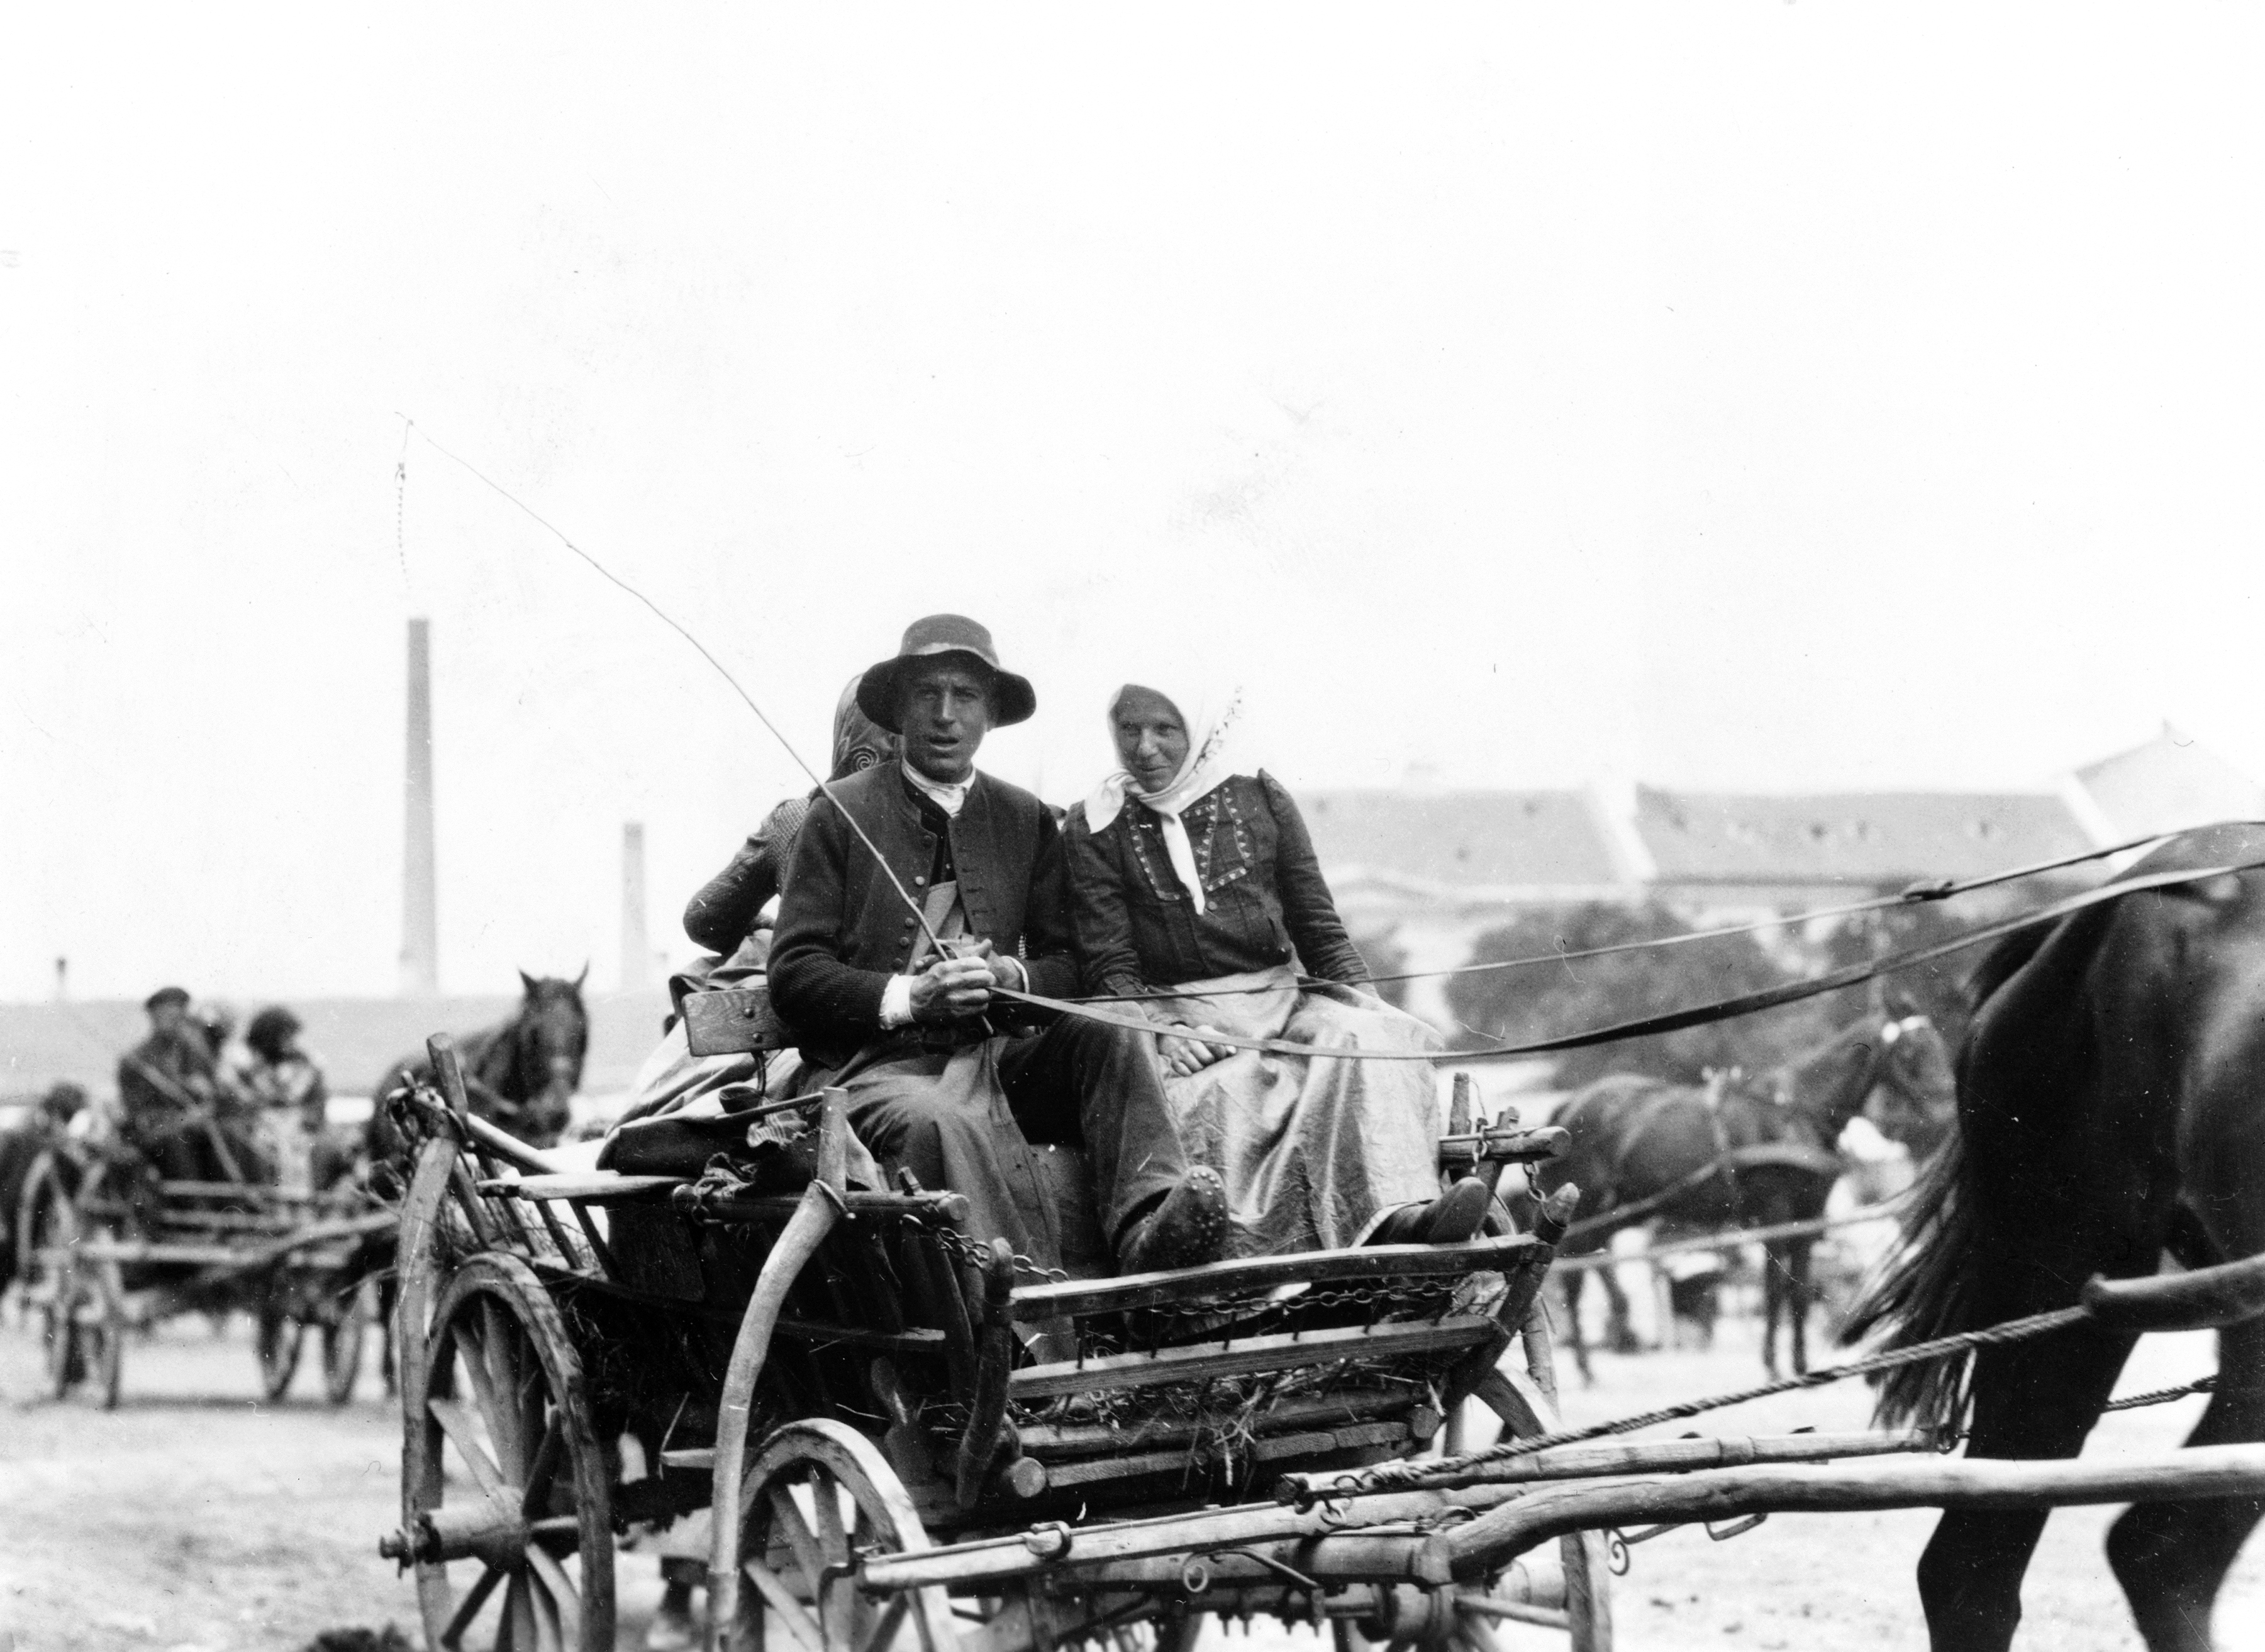 Man and woman on horse-drawn wagon, returning from market, Hungary 1923